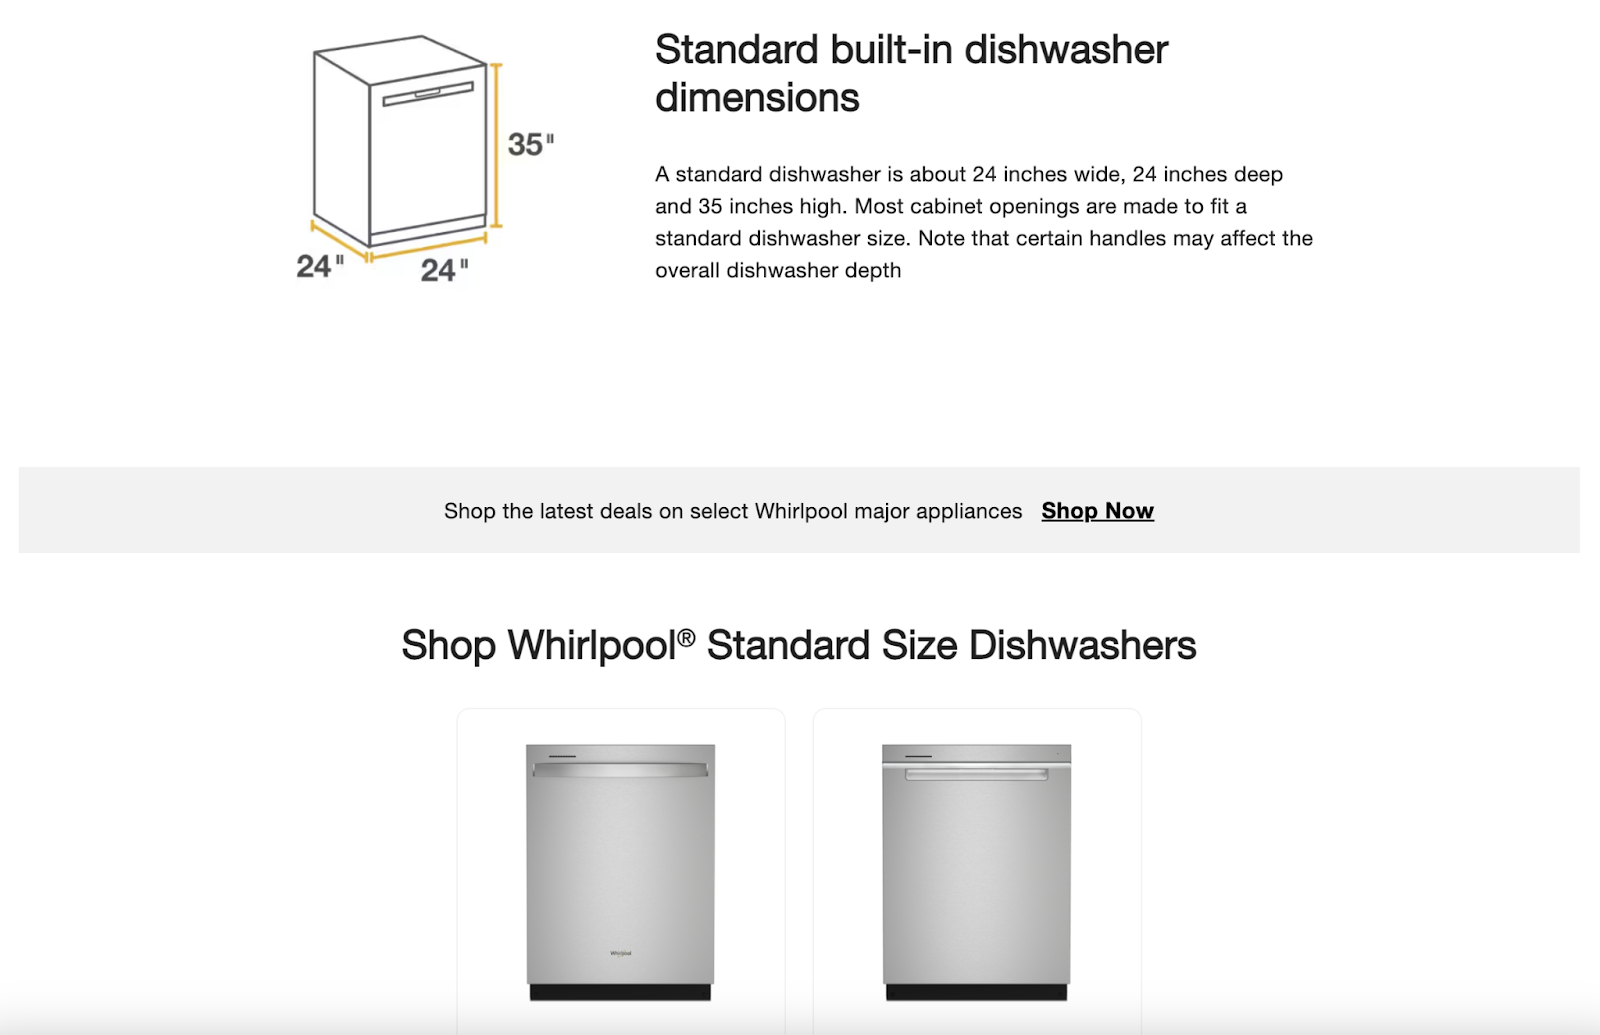 Whirlpool webpage with standard built-in dishwasher dimensions and shopping section